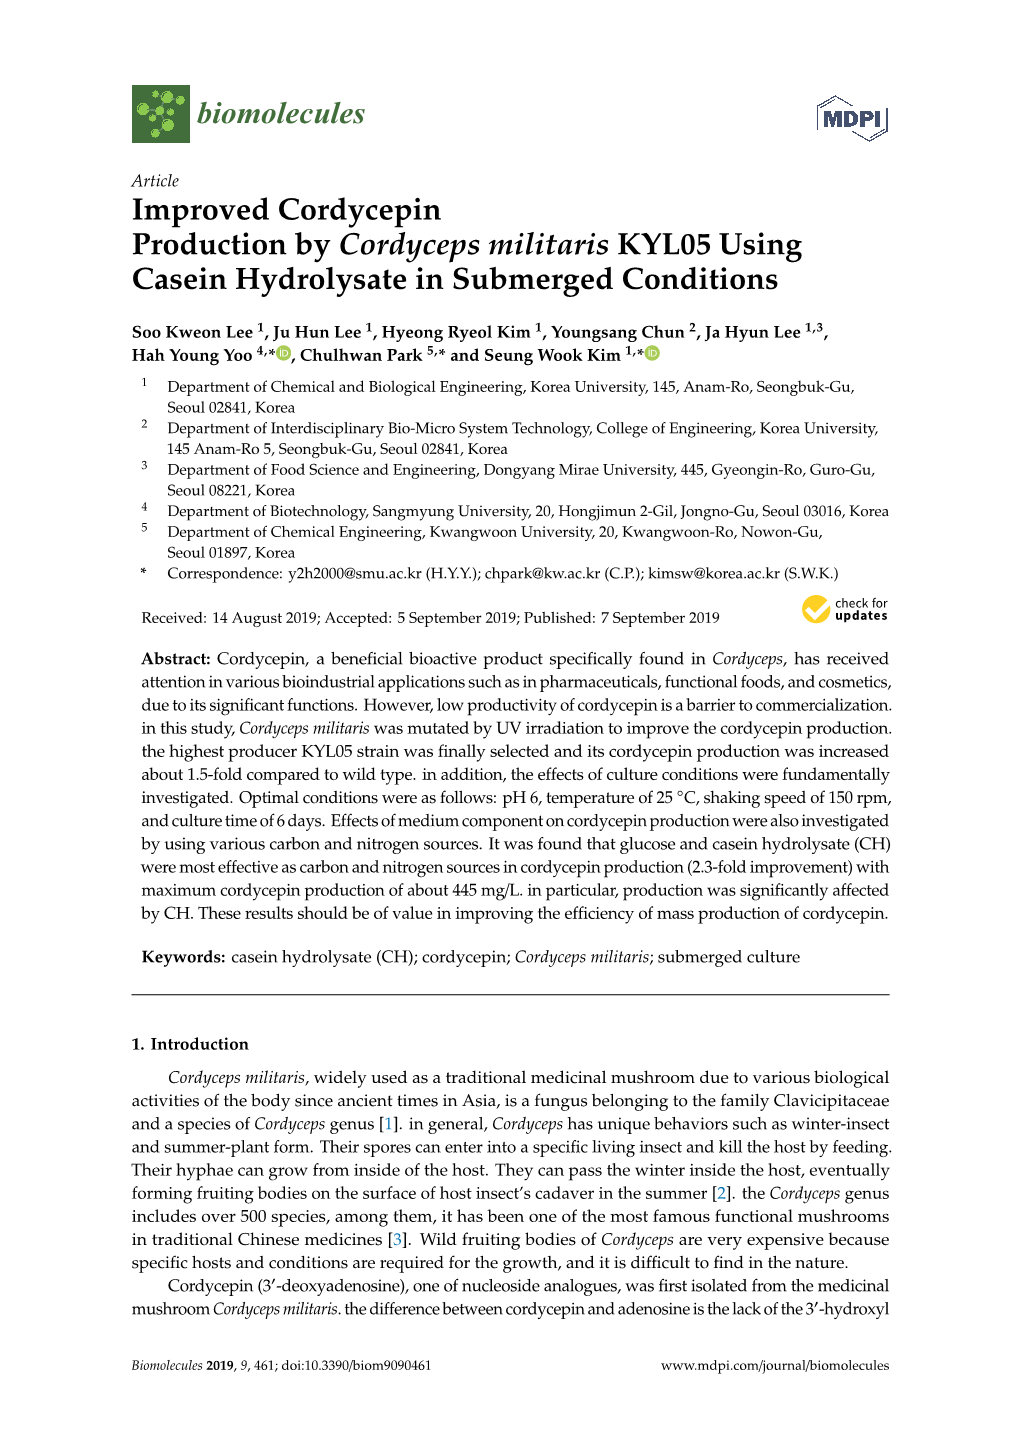 Improved Cordycepin Production by Cordyceps Militaris KYL05 Using Casein Hydrolysate in Submerged Conditions